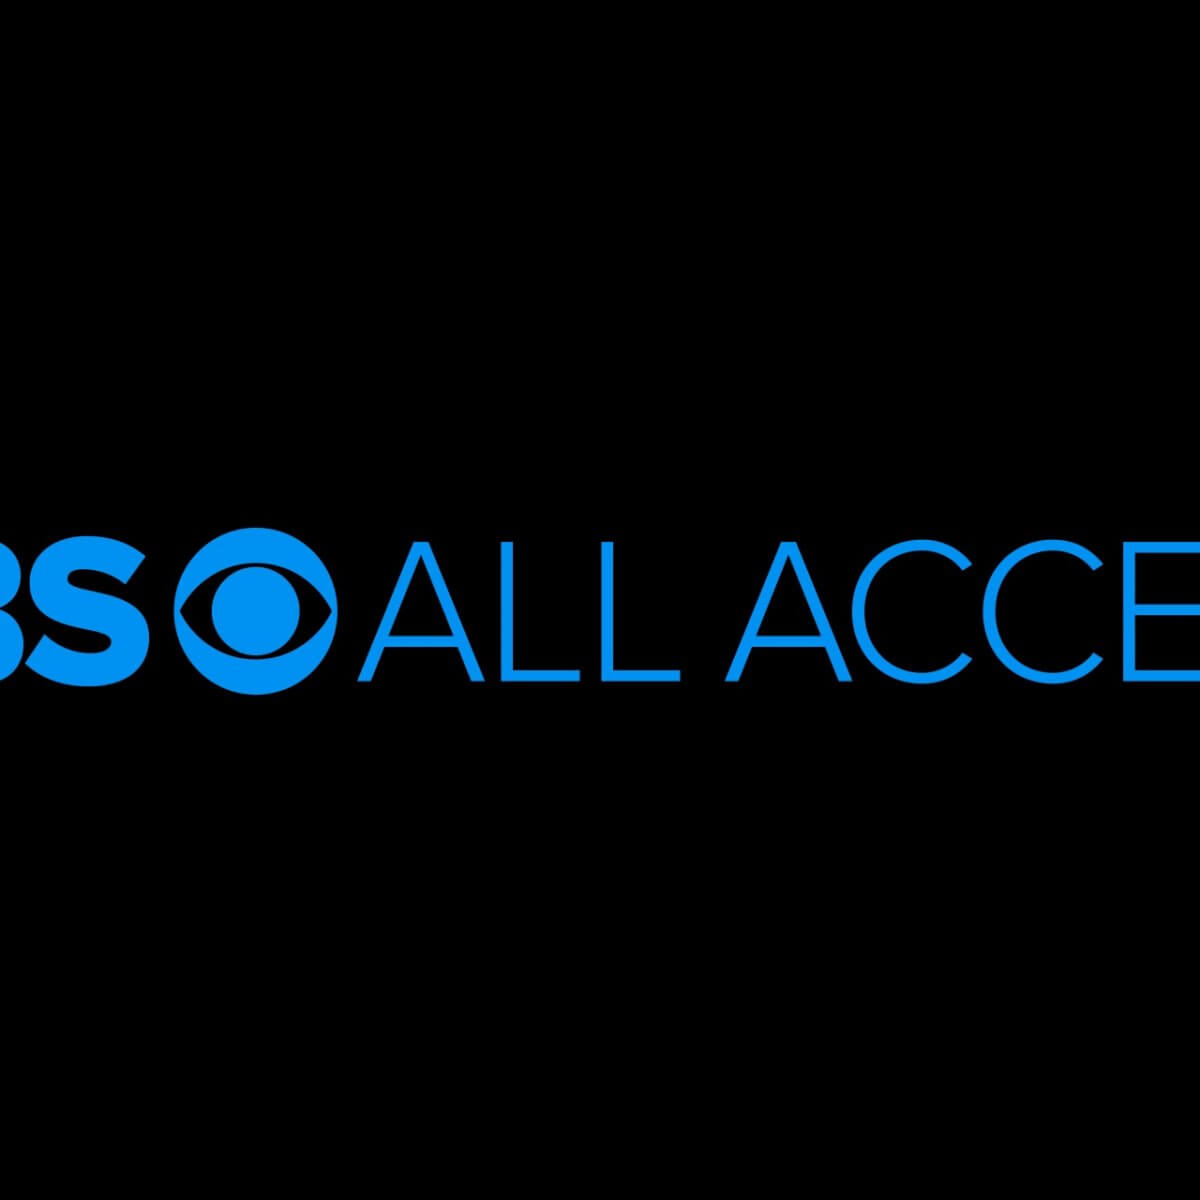 How To Fix Cbs All Access Not Working On Amazon Firestick